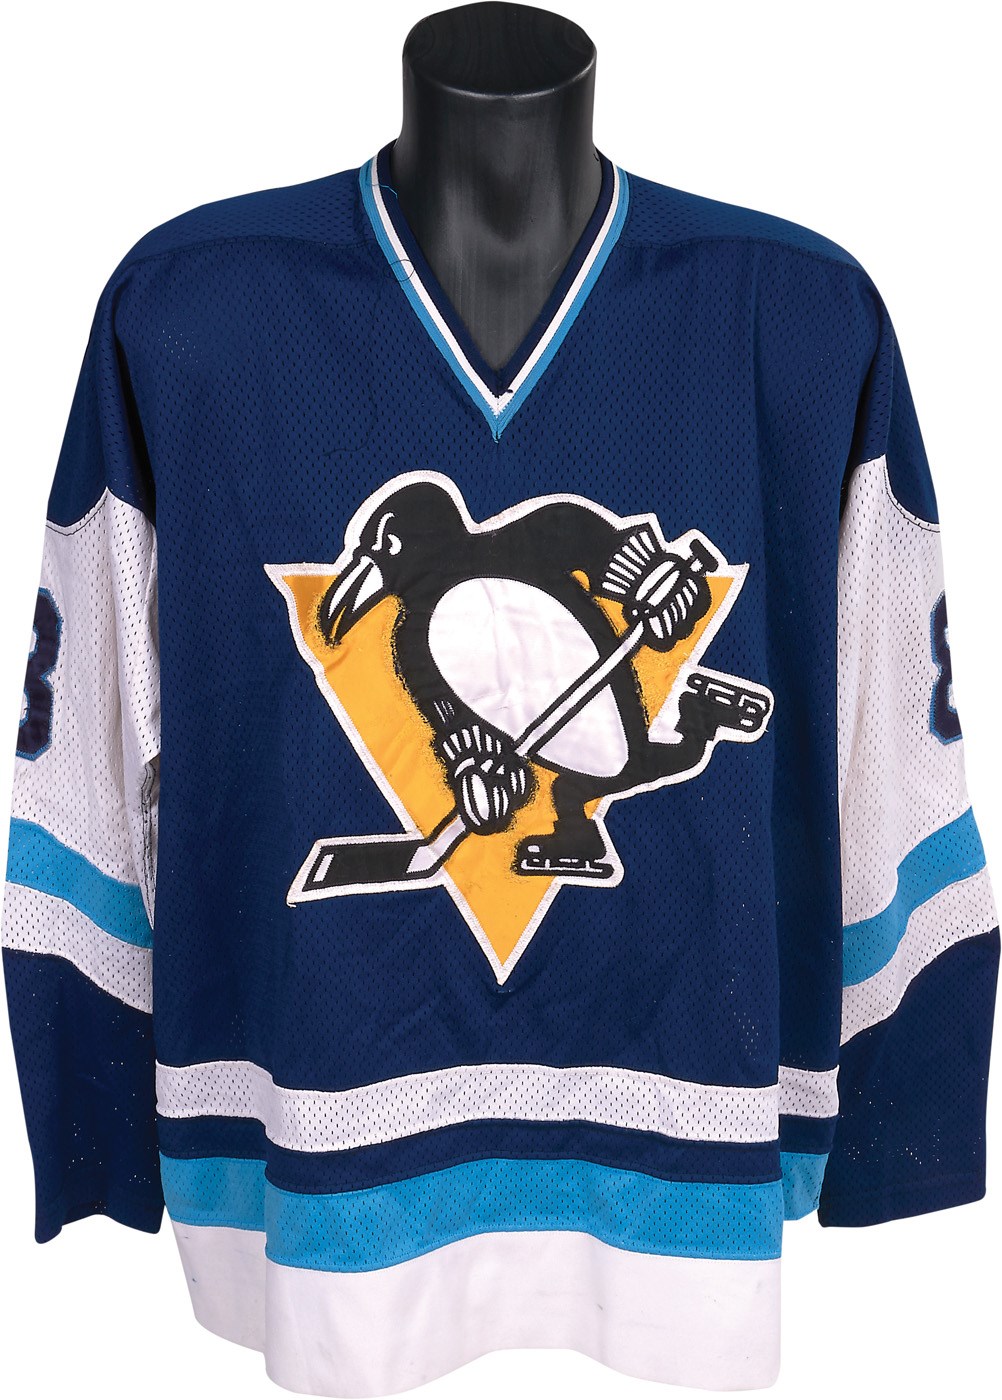 Hockey - 1978-79 Dave Schultz "Hammered" Game Worn Pittsburgh Penguins Jersey (Photo-Matched & MeiGray LOA)